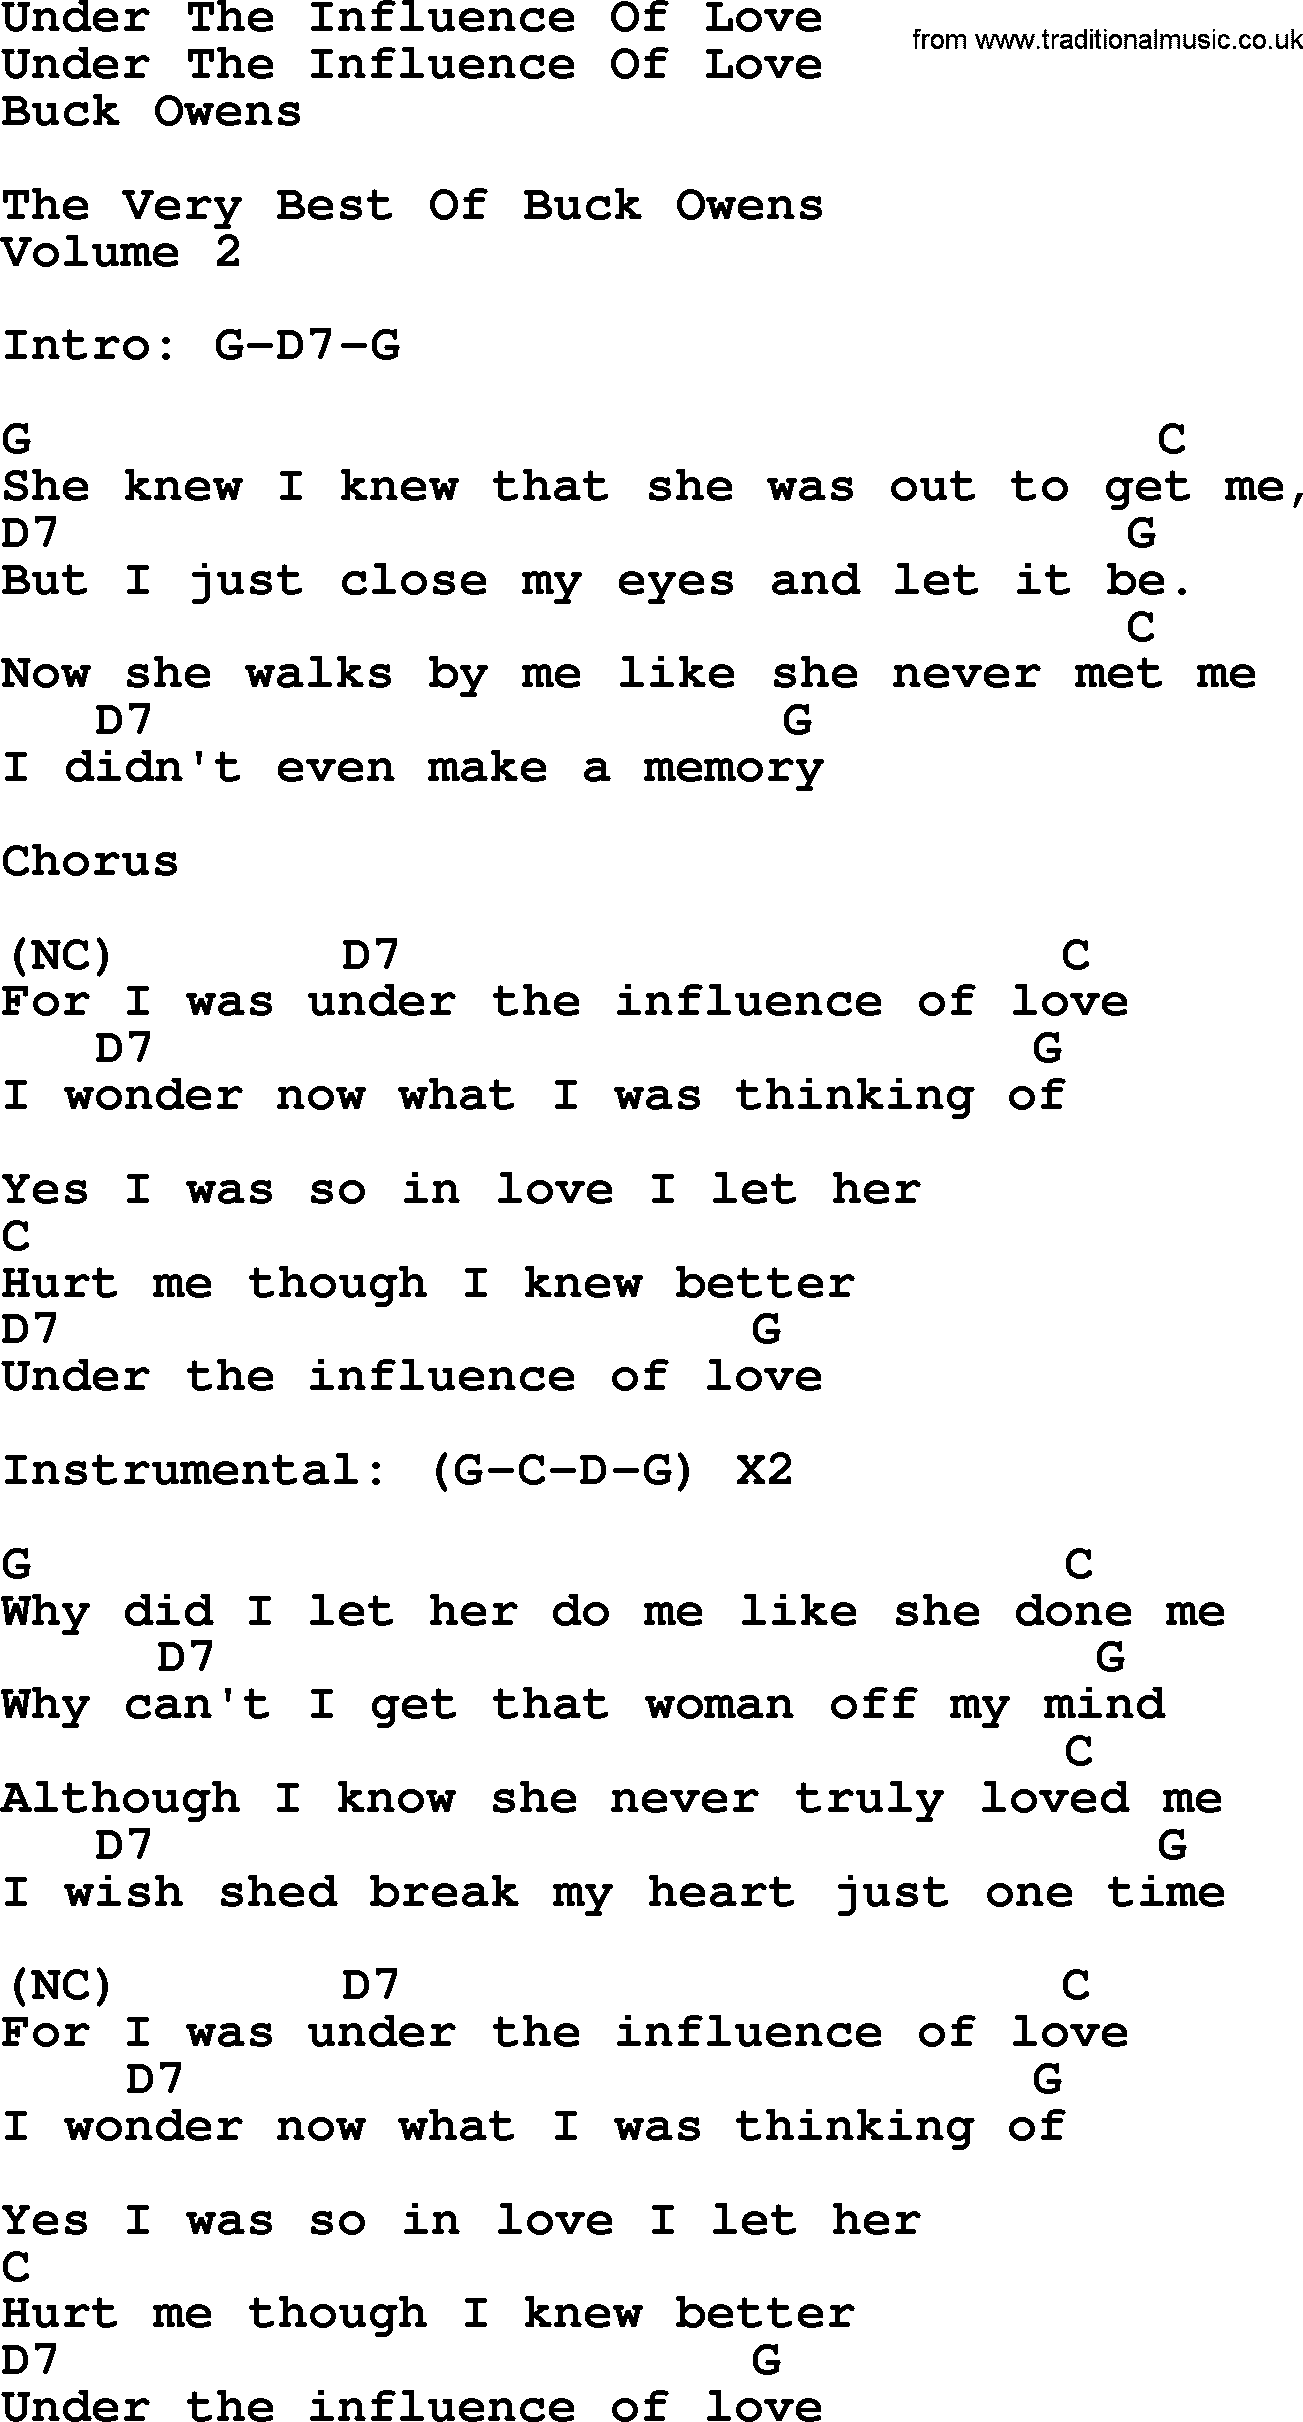 Bluegrass song: Under The Influence Of Love, lyrics and chords